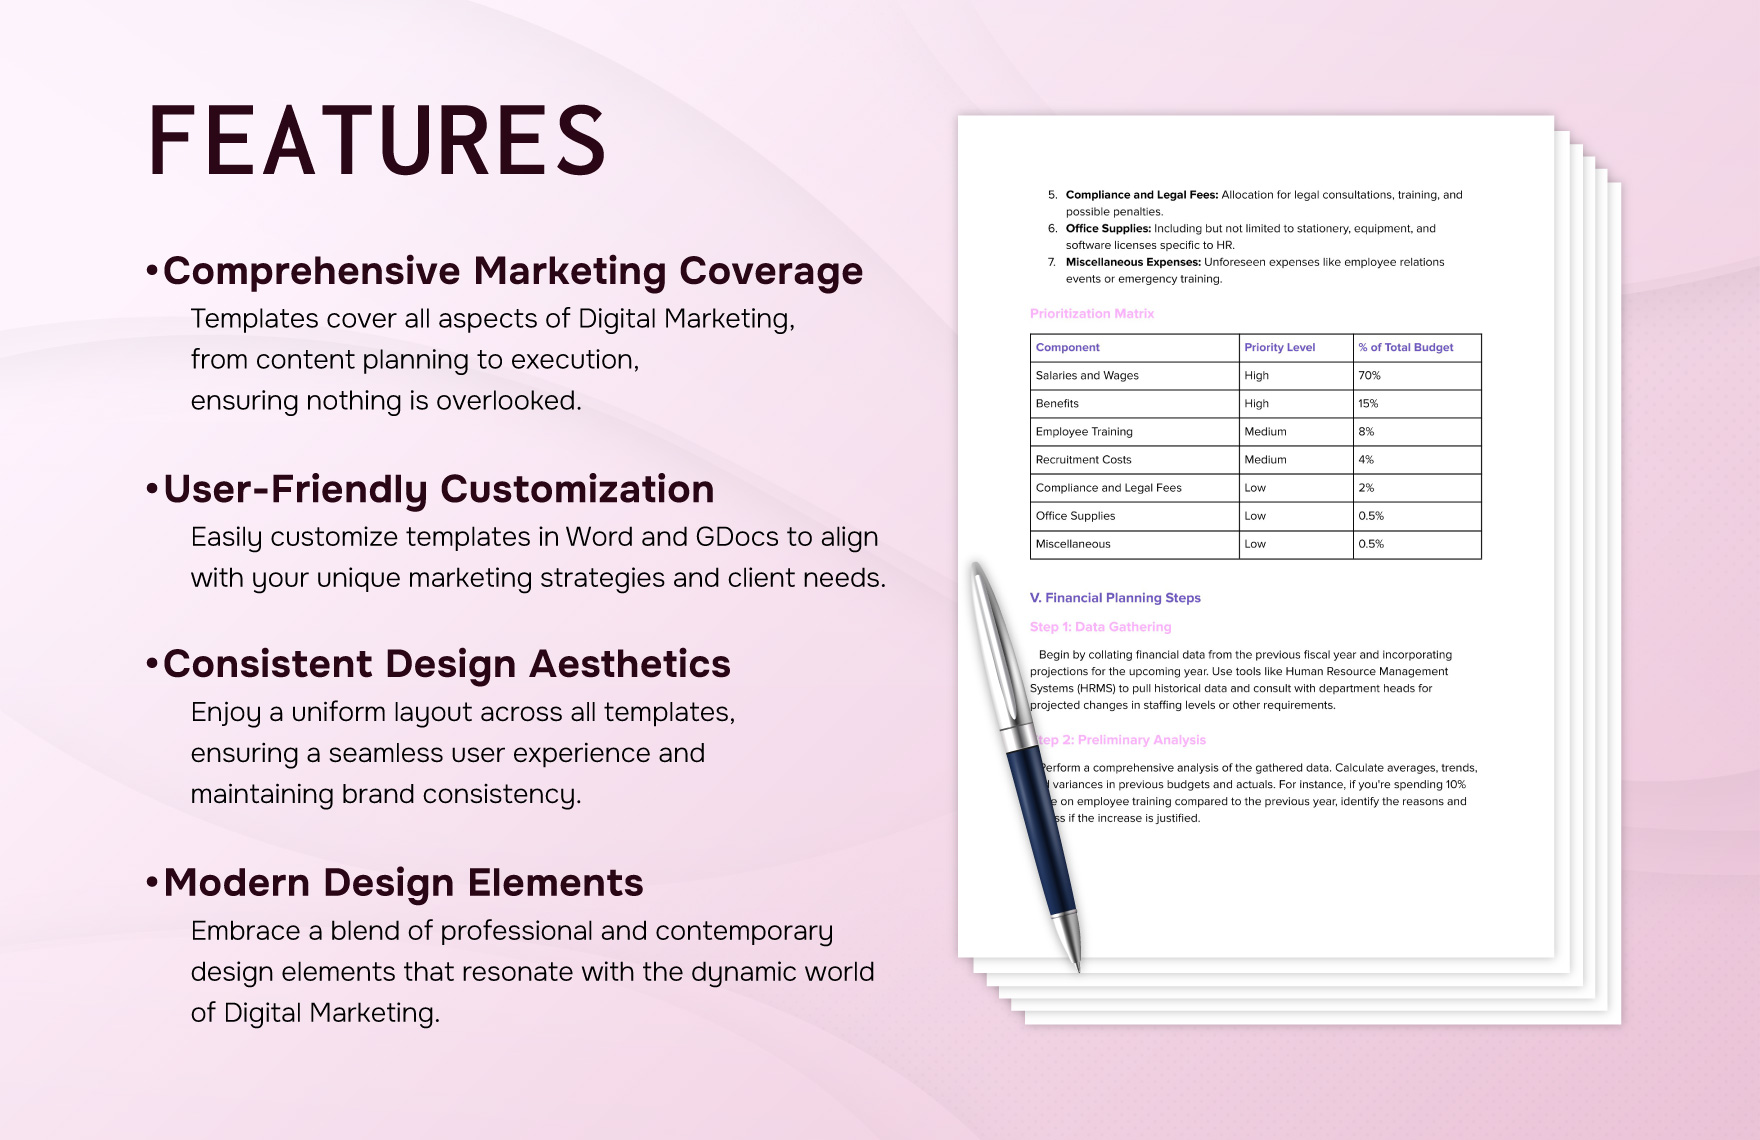 Digital Marketing Agency Financial Planning and Budgeting Guide for HR Department Template